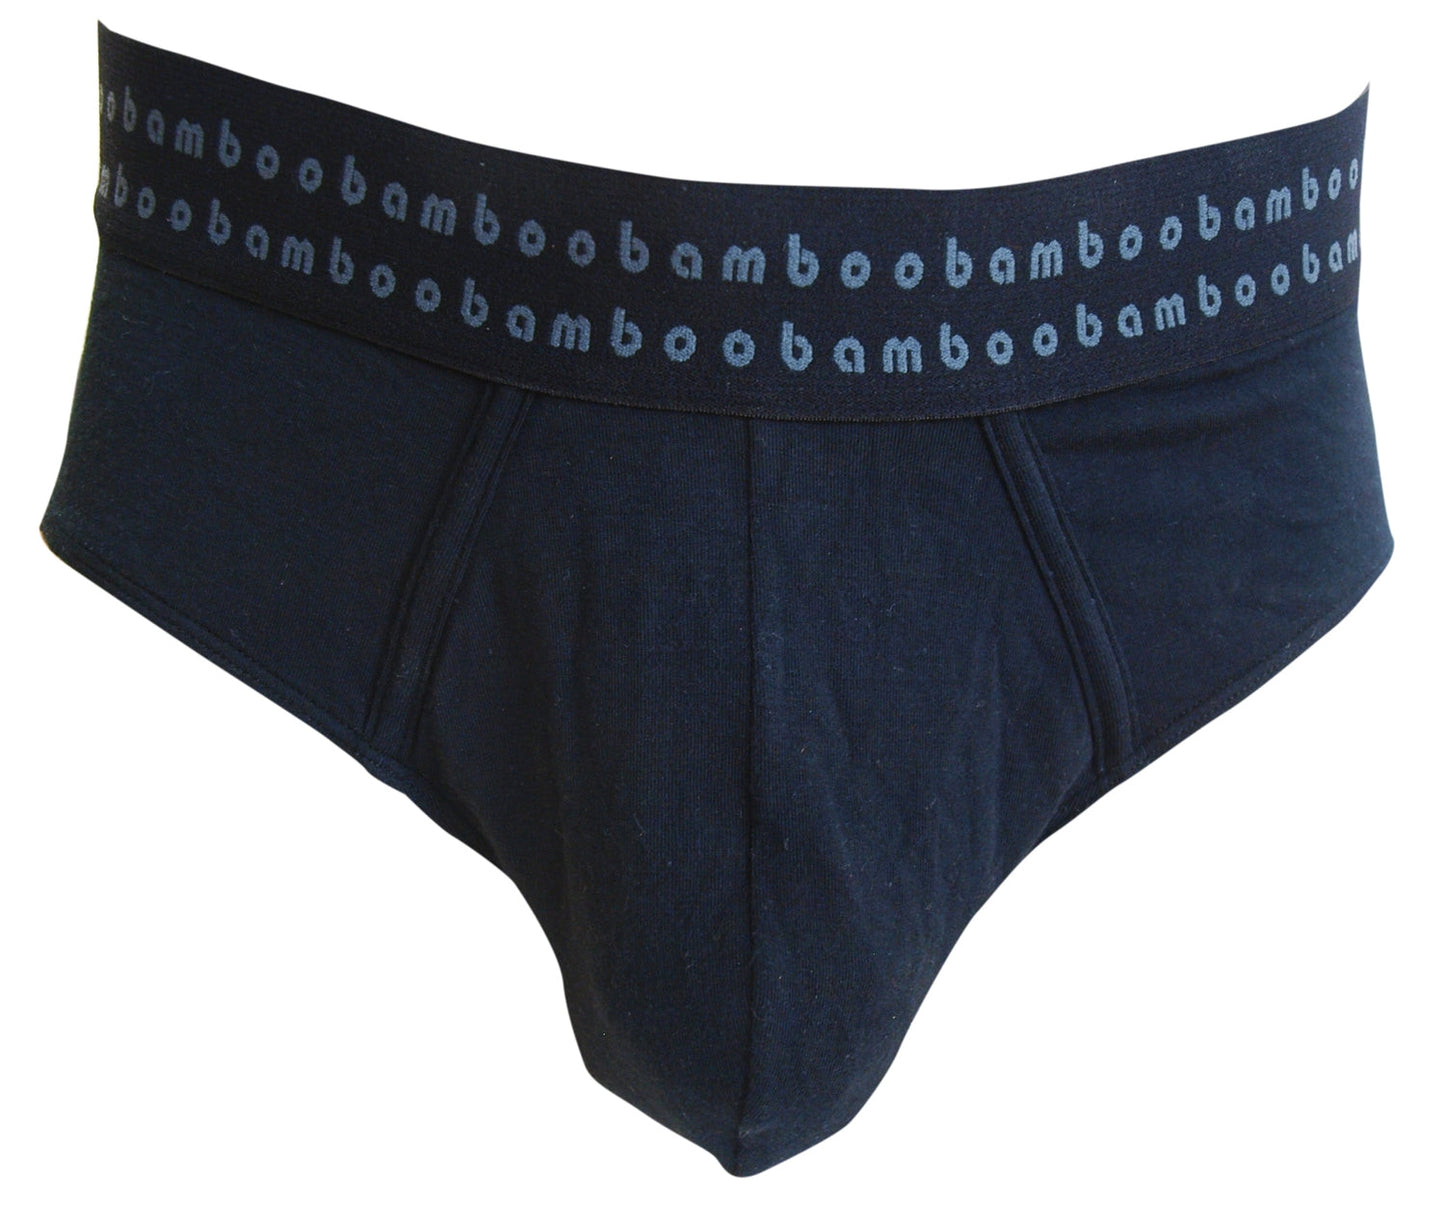 Mens Bamboo Trunks M Black Mens Underwear by Bamboo Textiles | The Bloke Shop